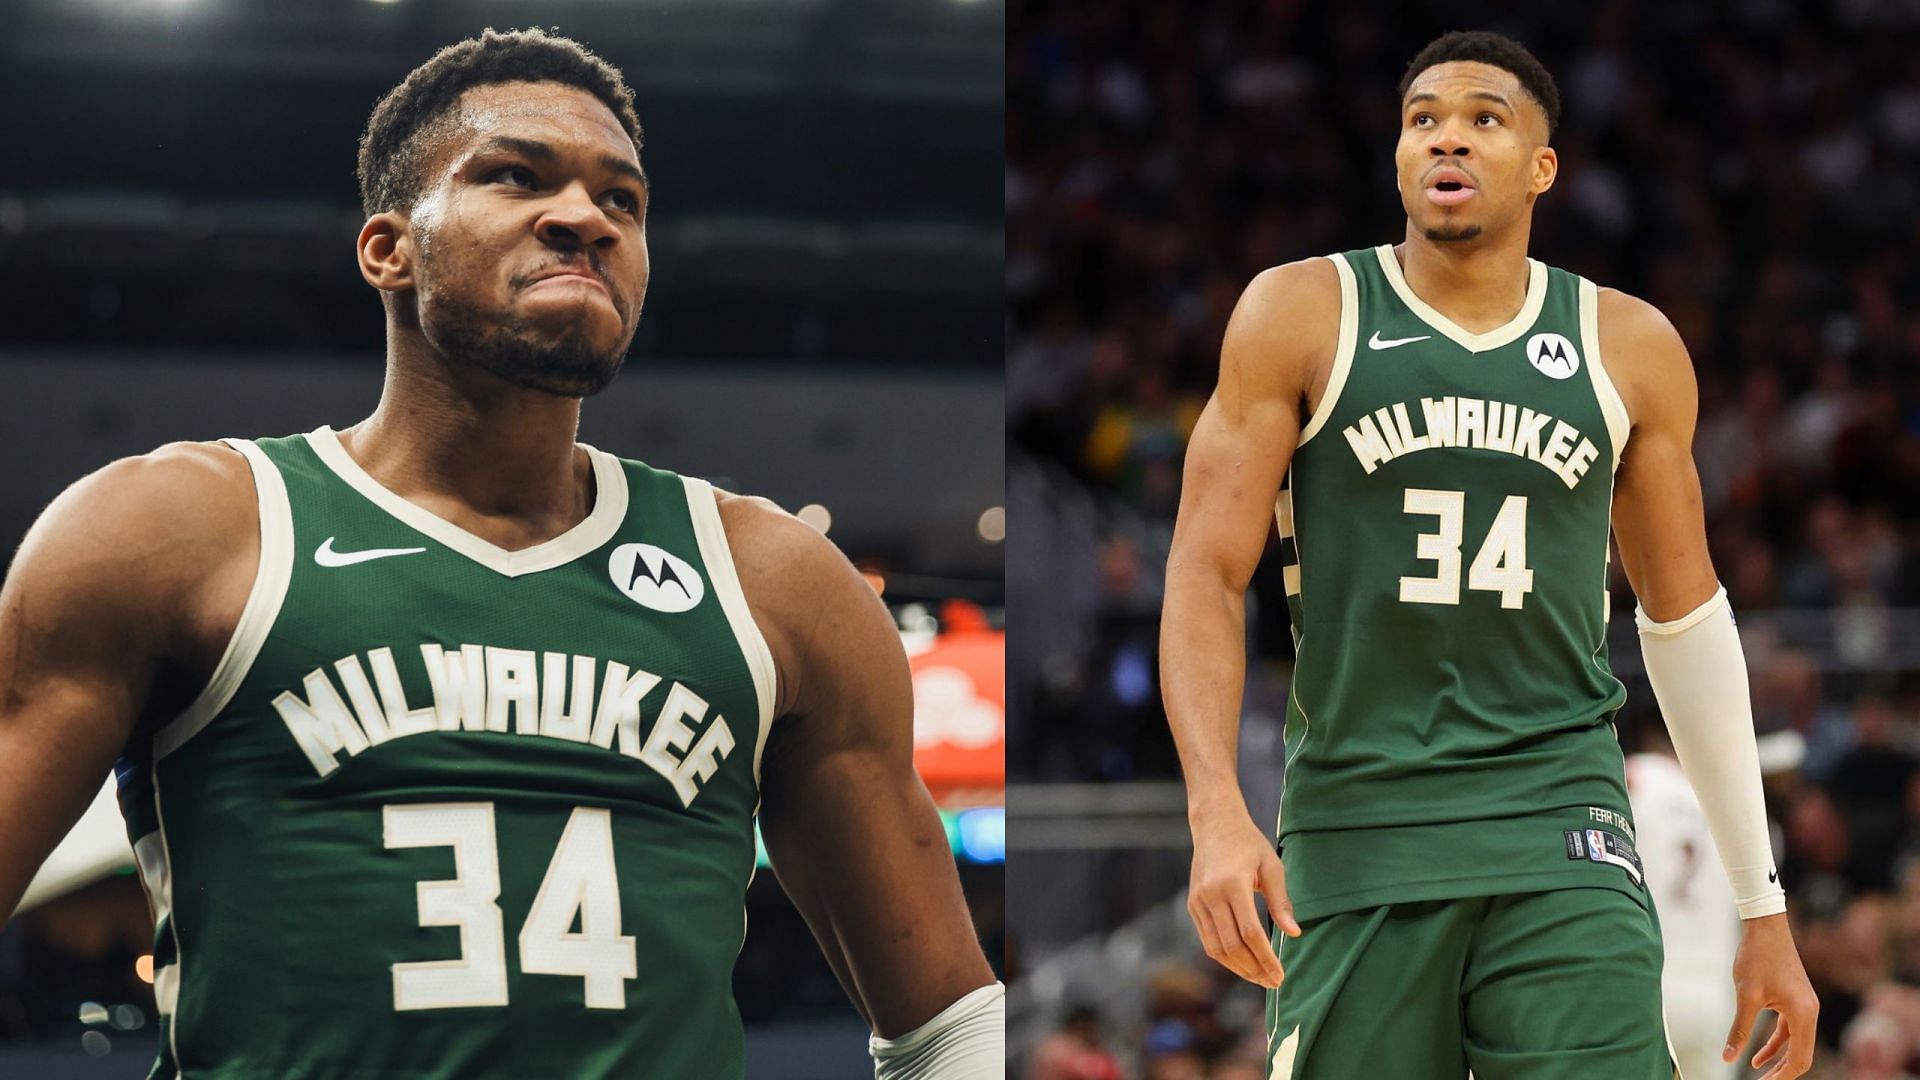 Is Giannis Antetokounmpo playing tonight against the New York Knicks? Latest injury update for 2x MVP (Dec. 23)